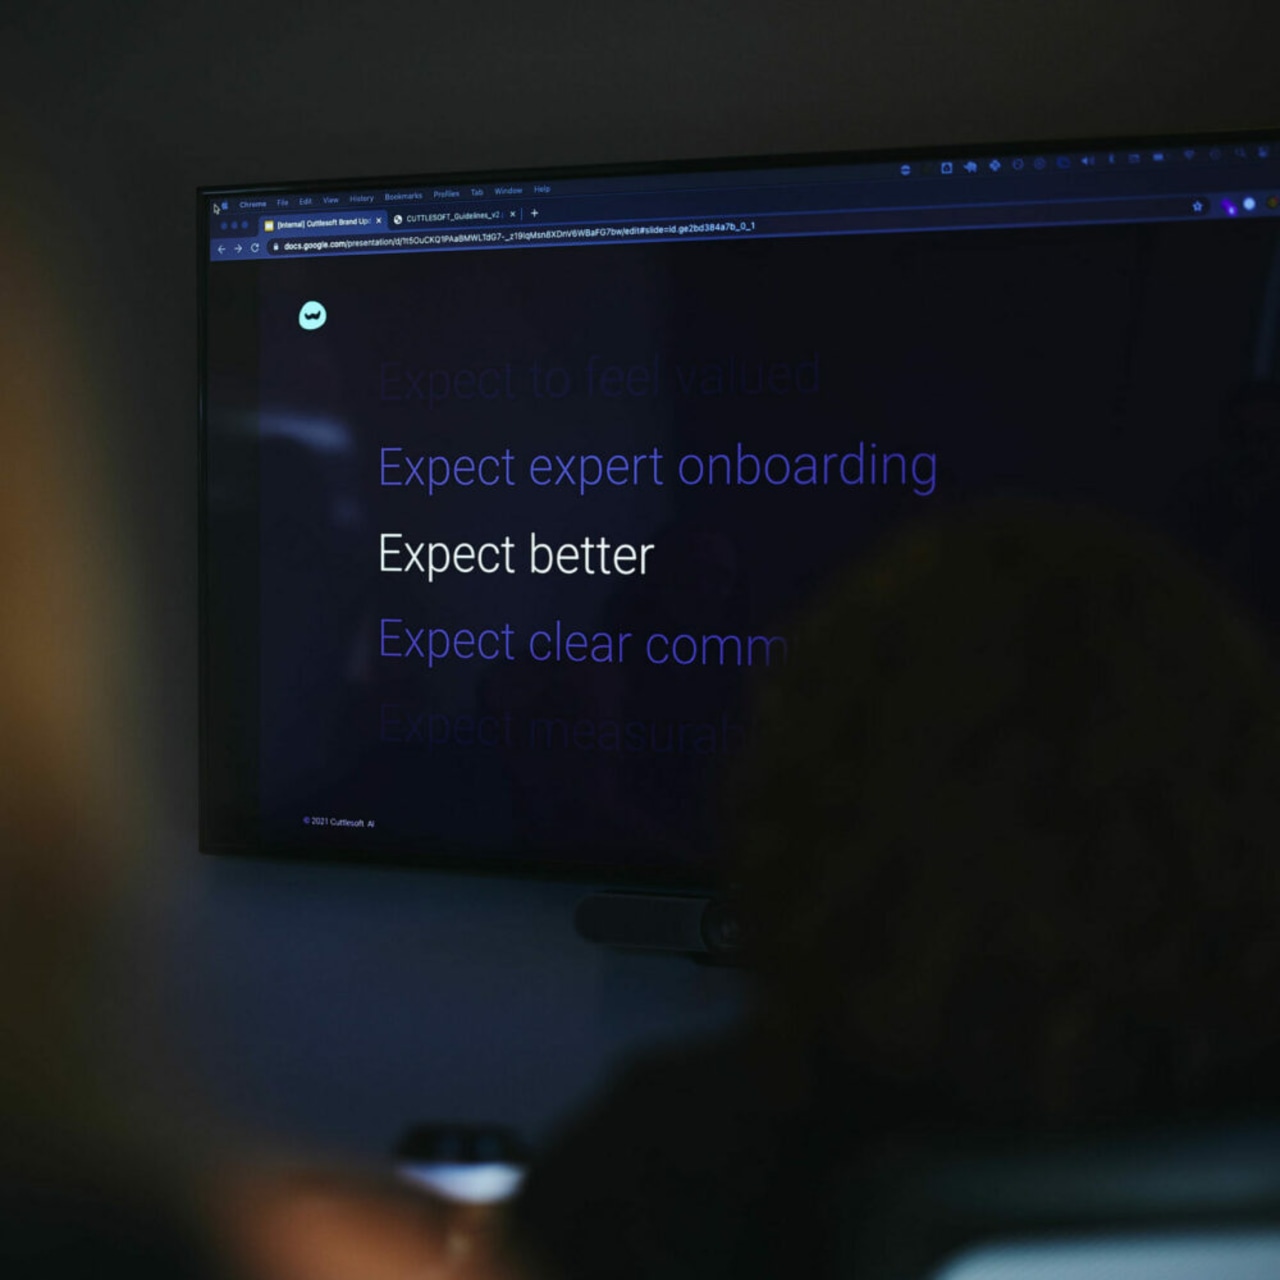 Cuttlesoft's promise is simple, we want our clients and partners to &quot;Expect Better&quot;. This applies to our whole process including how we develop Node.js applications.